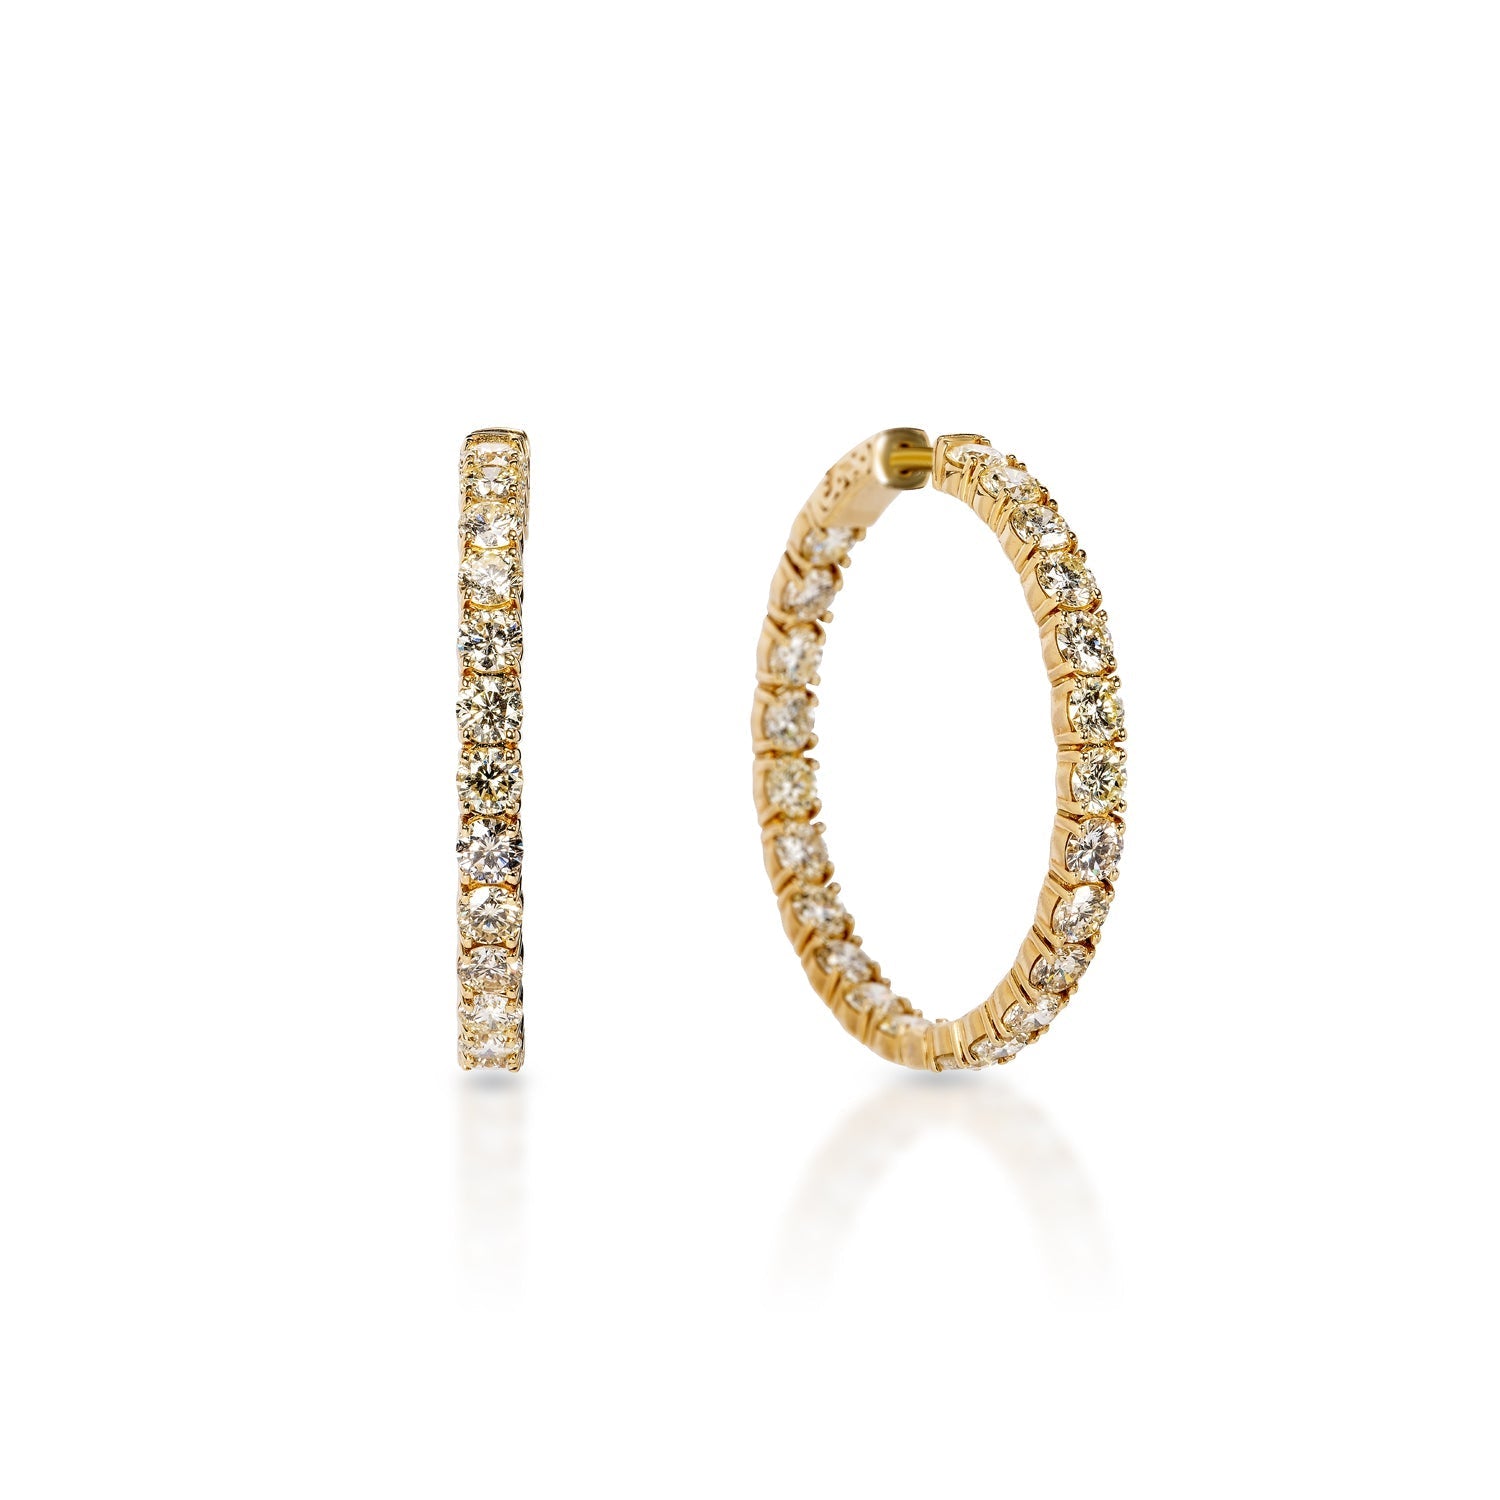 Ariel 10 Carat Round Brilliant Diamond Hoop Earrings in 14k Yellow Gold Front and Side View